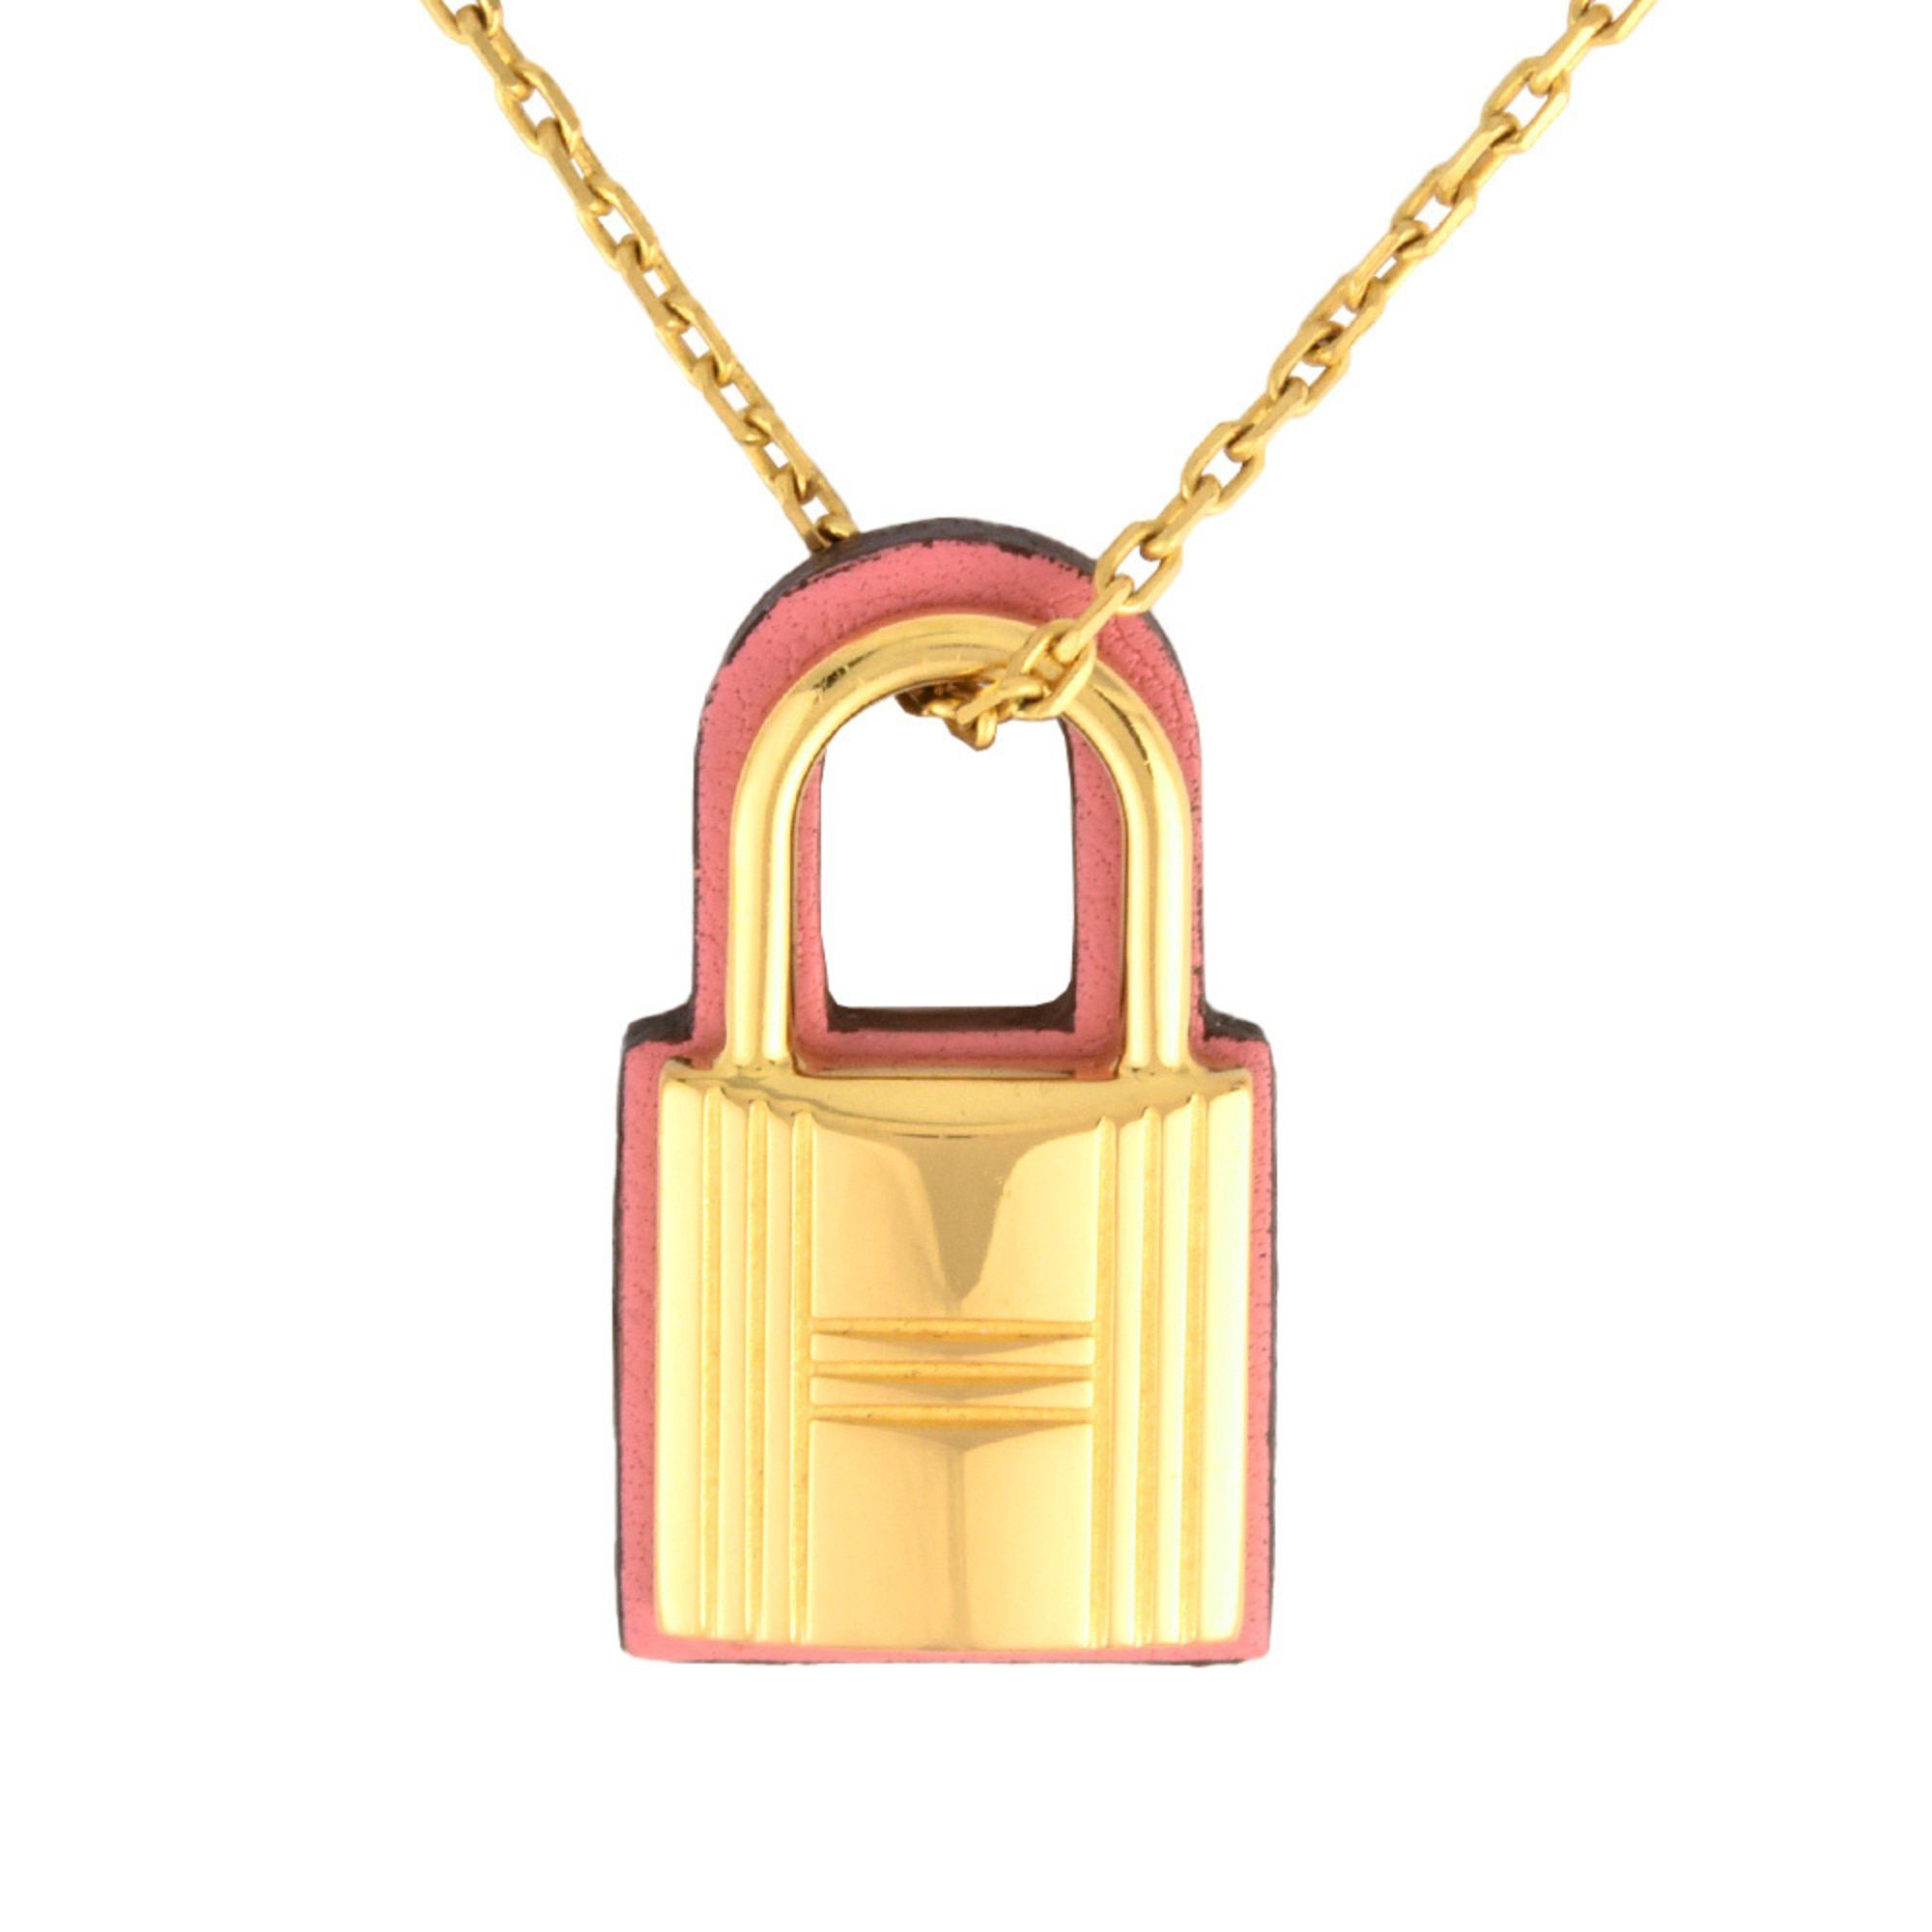 image of Hermes O'kelly Pm Pendant Necklace Leather Gp D Engraved Pink It75Tzueryww in Gold, Women's